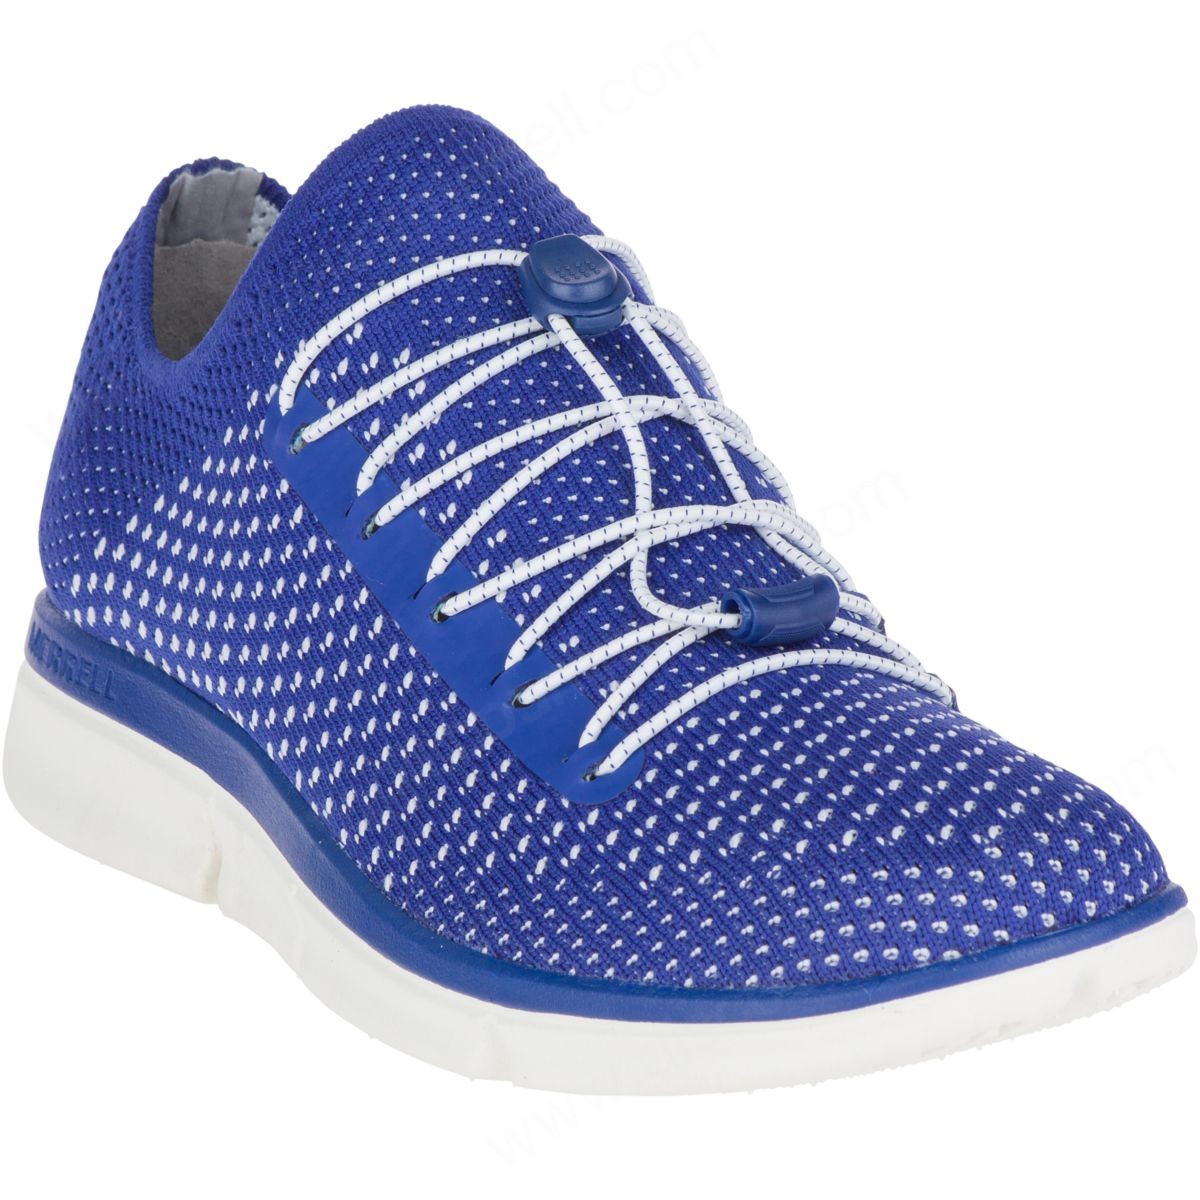 Merrell Lady's Zoe Sojourn Lace Knit Q2 Sodalite - -3